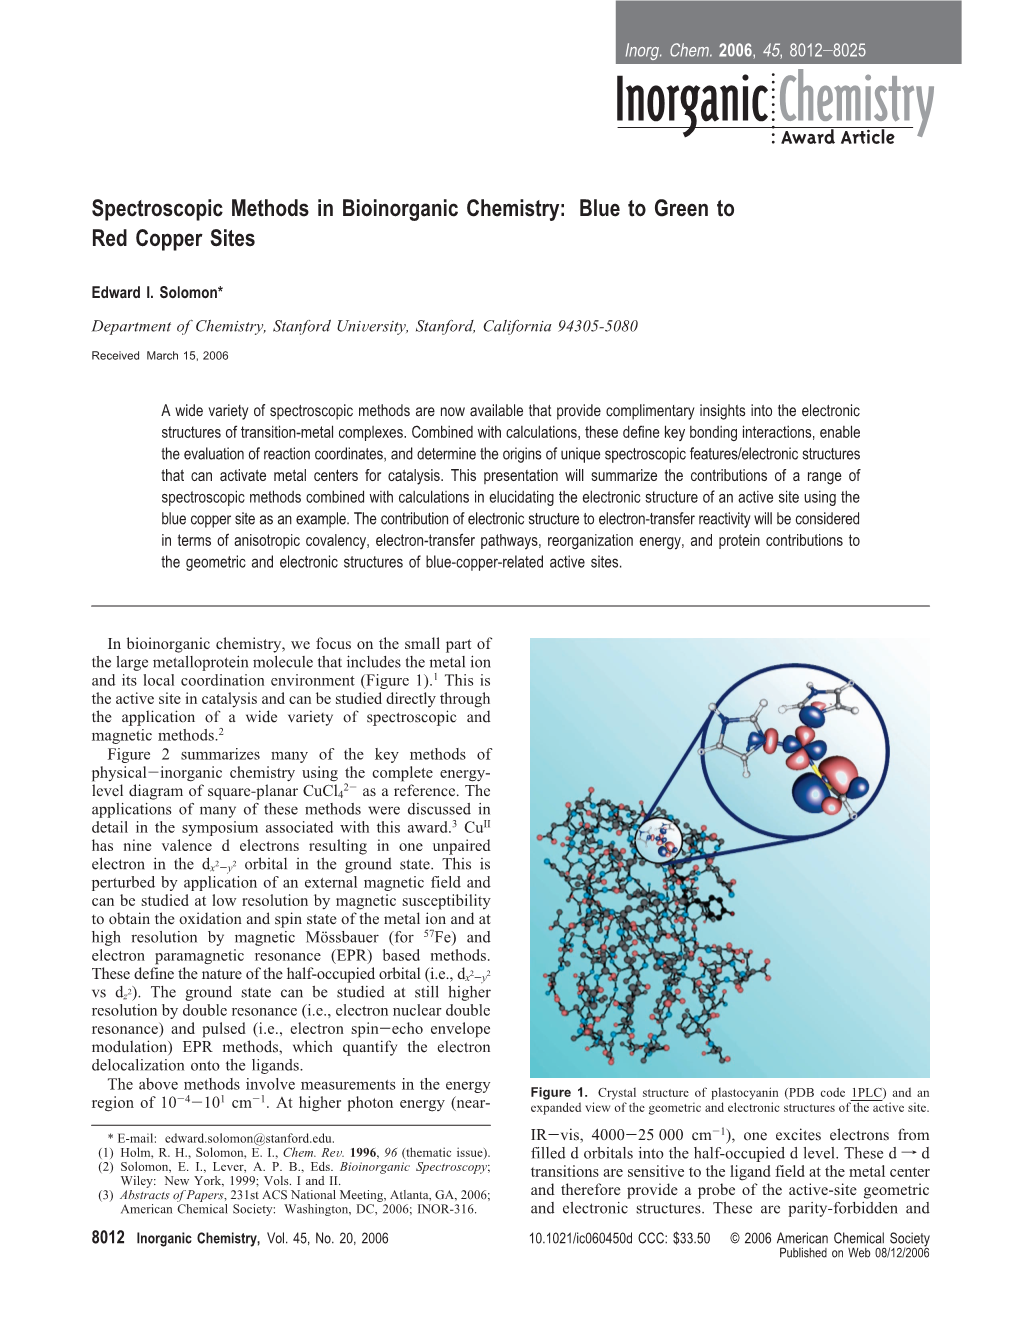 Spectroscopic Methods in Bioinorganic Chemistry: Blue to Green to Red Copper Sites